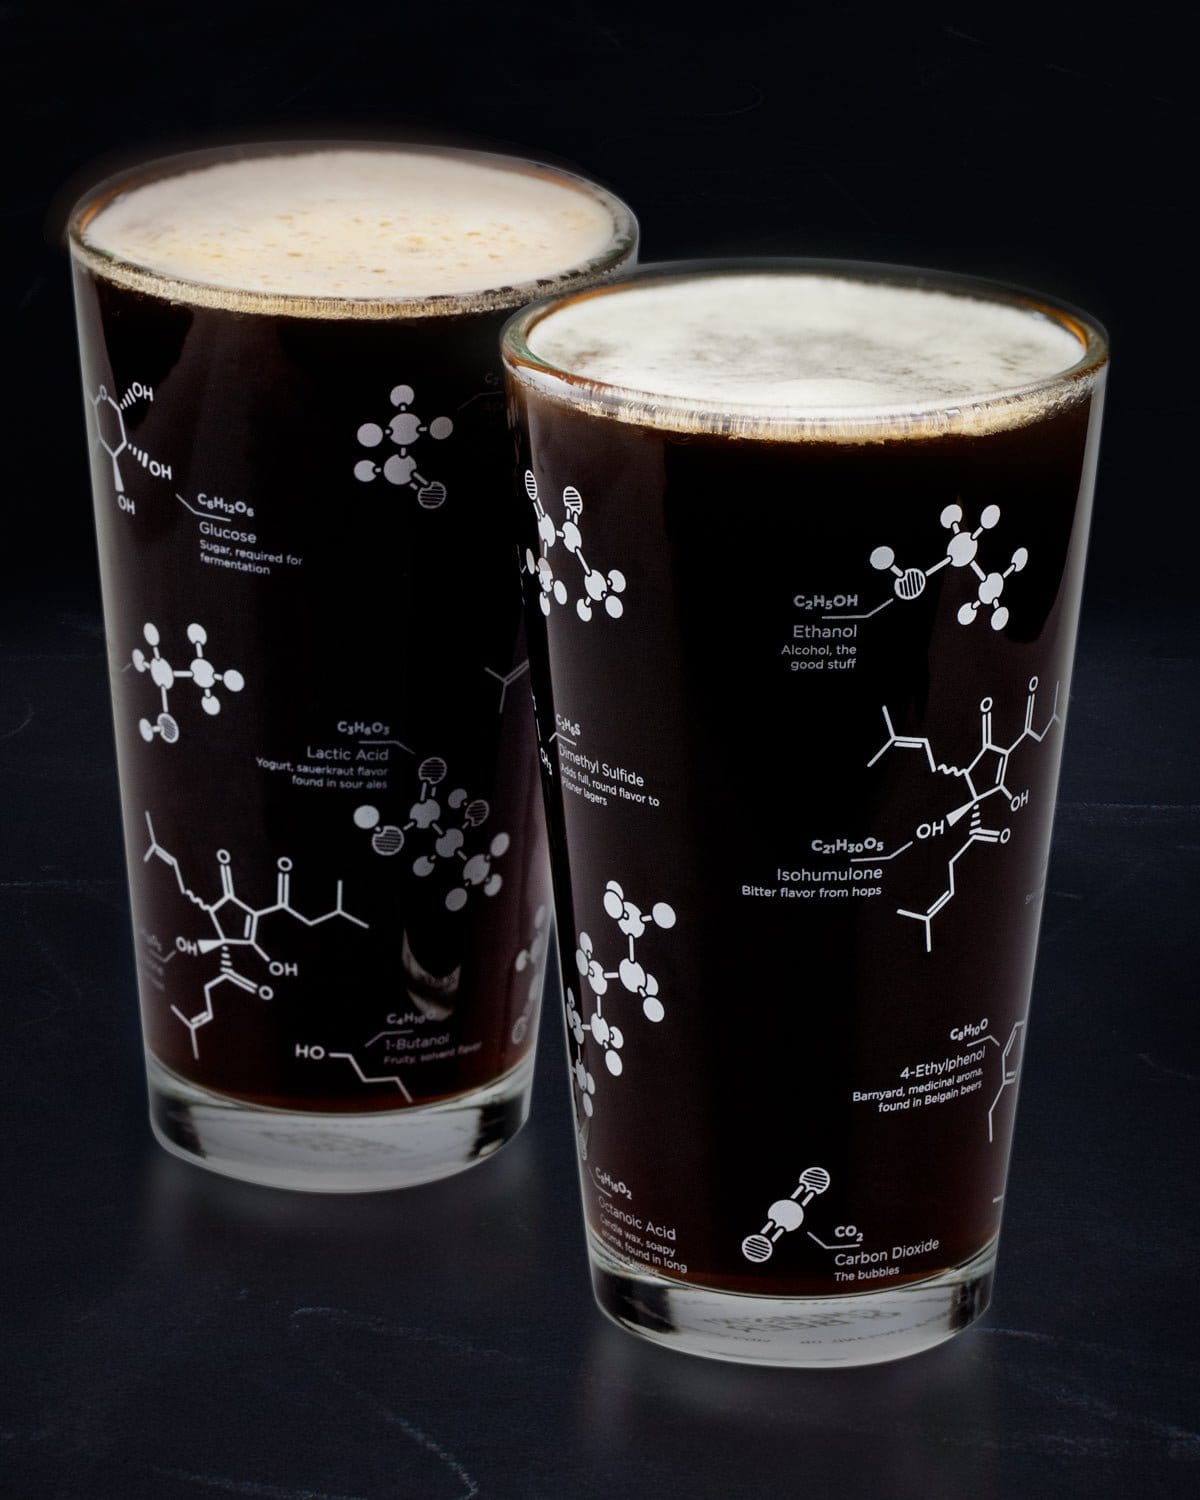 https://cdn.shopify.com/s/files/1/1055/1086/products/Beer-Chemistry-Pint-Glass-Set-Cognitive-Surplus-918.jpg?crop=center&height=1559&v=1659156262&width=1200